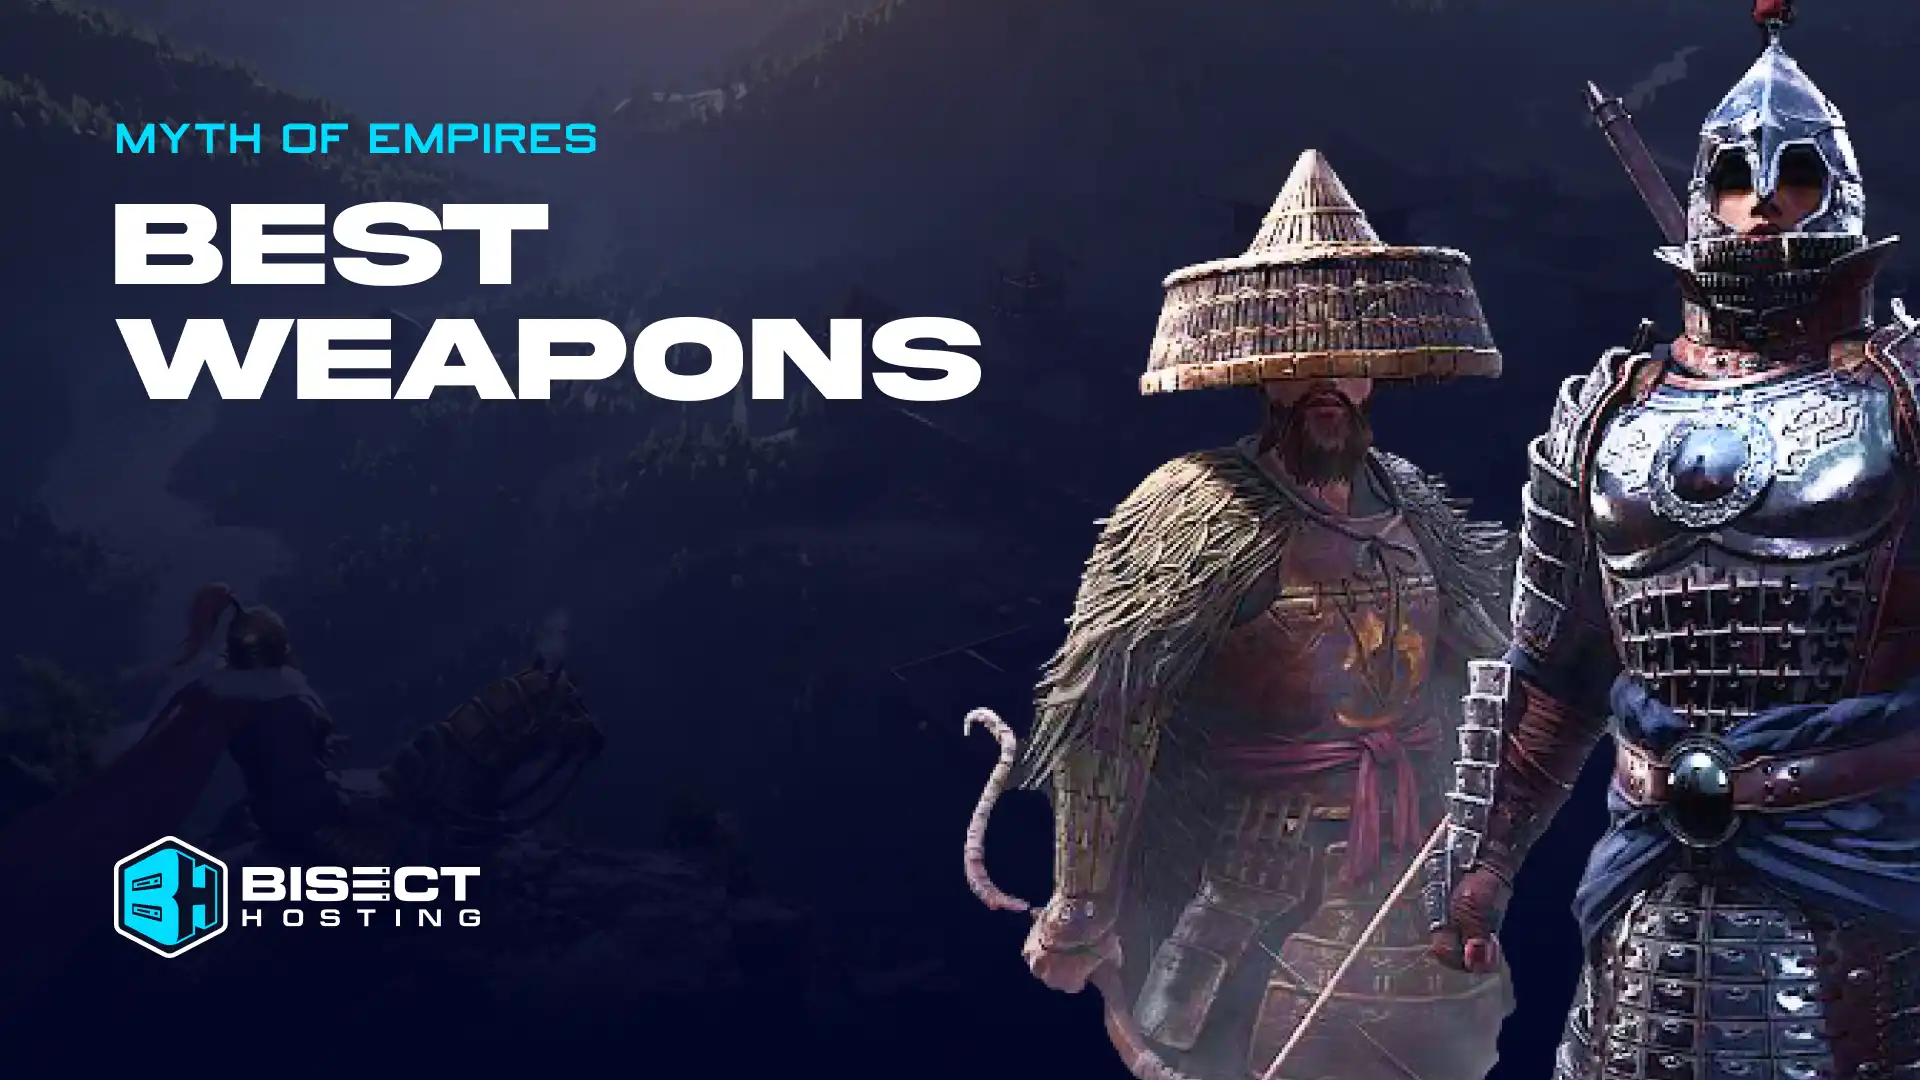 Myth of Empires: Best Weapons (Ranked)